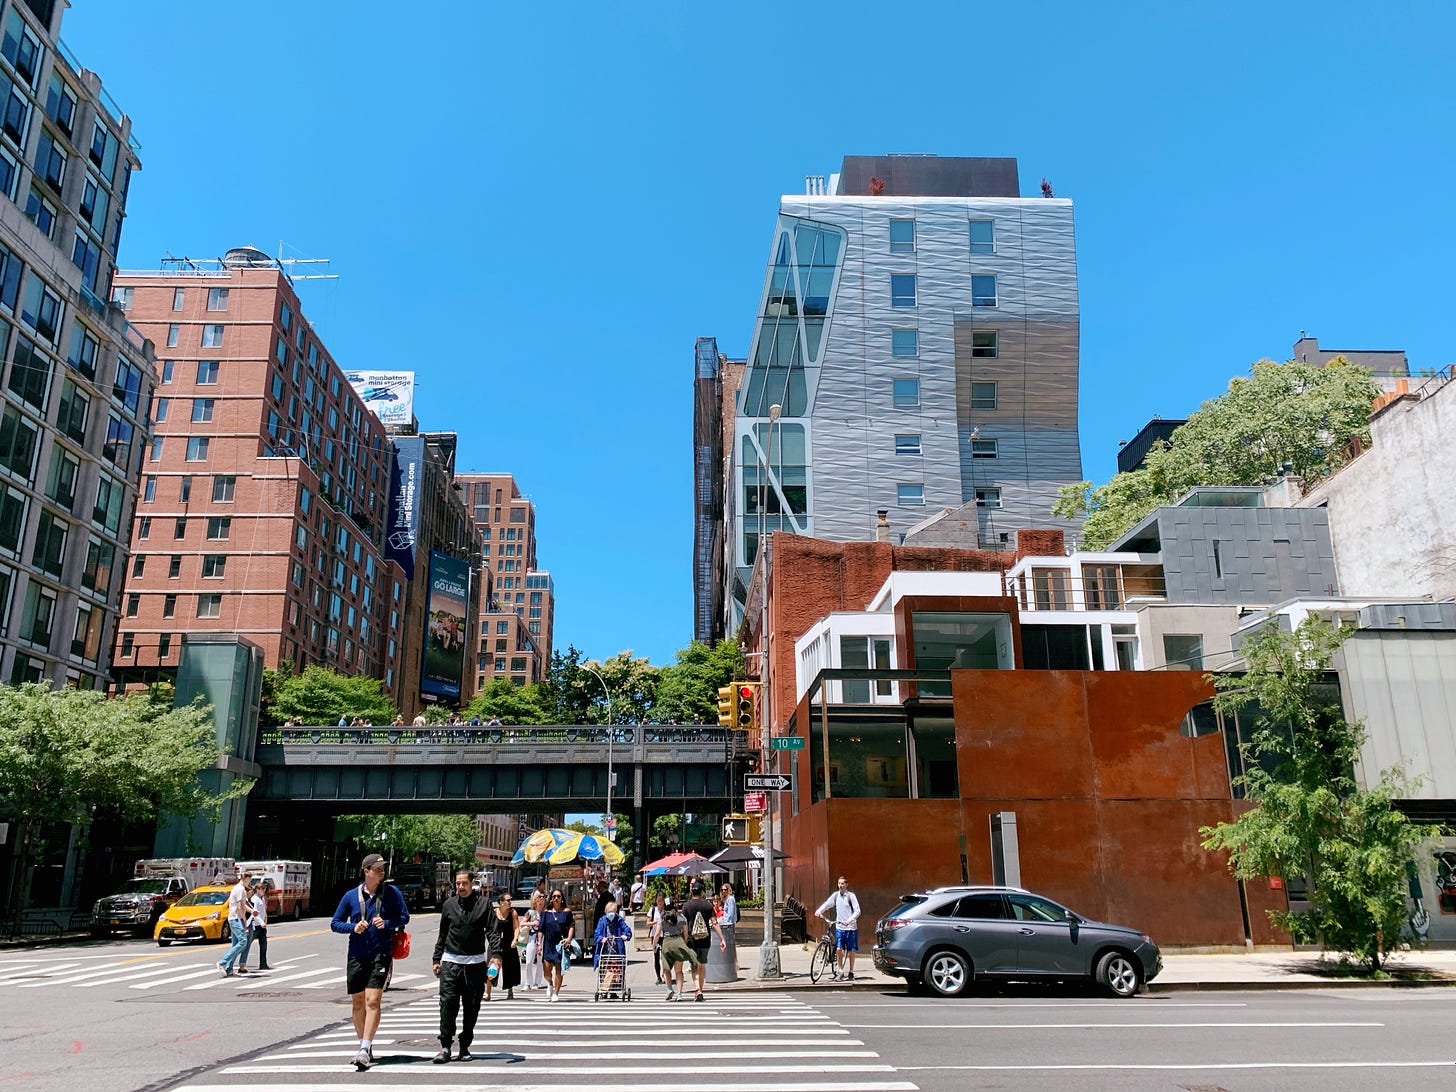 Looking at the High Line from 10th avenue